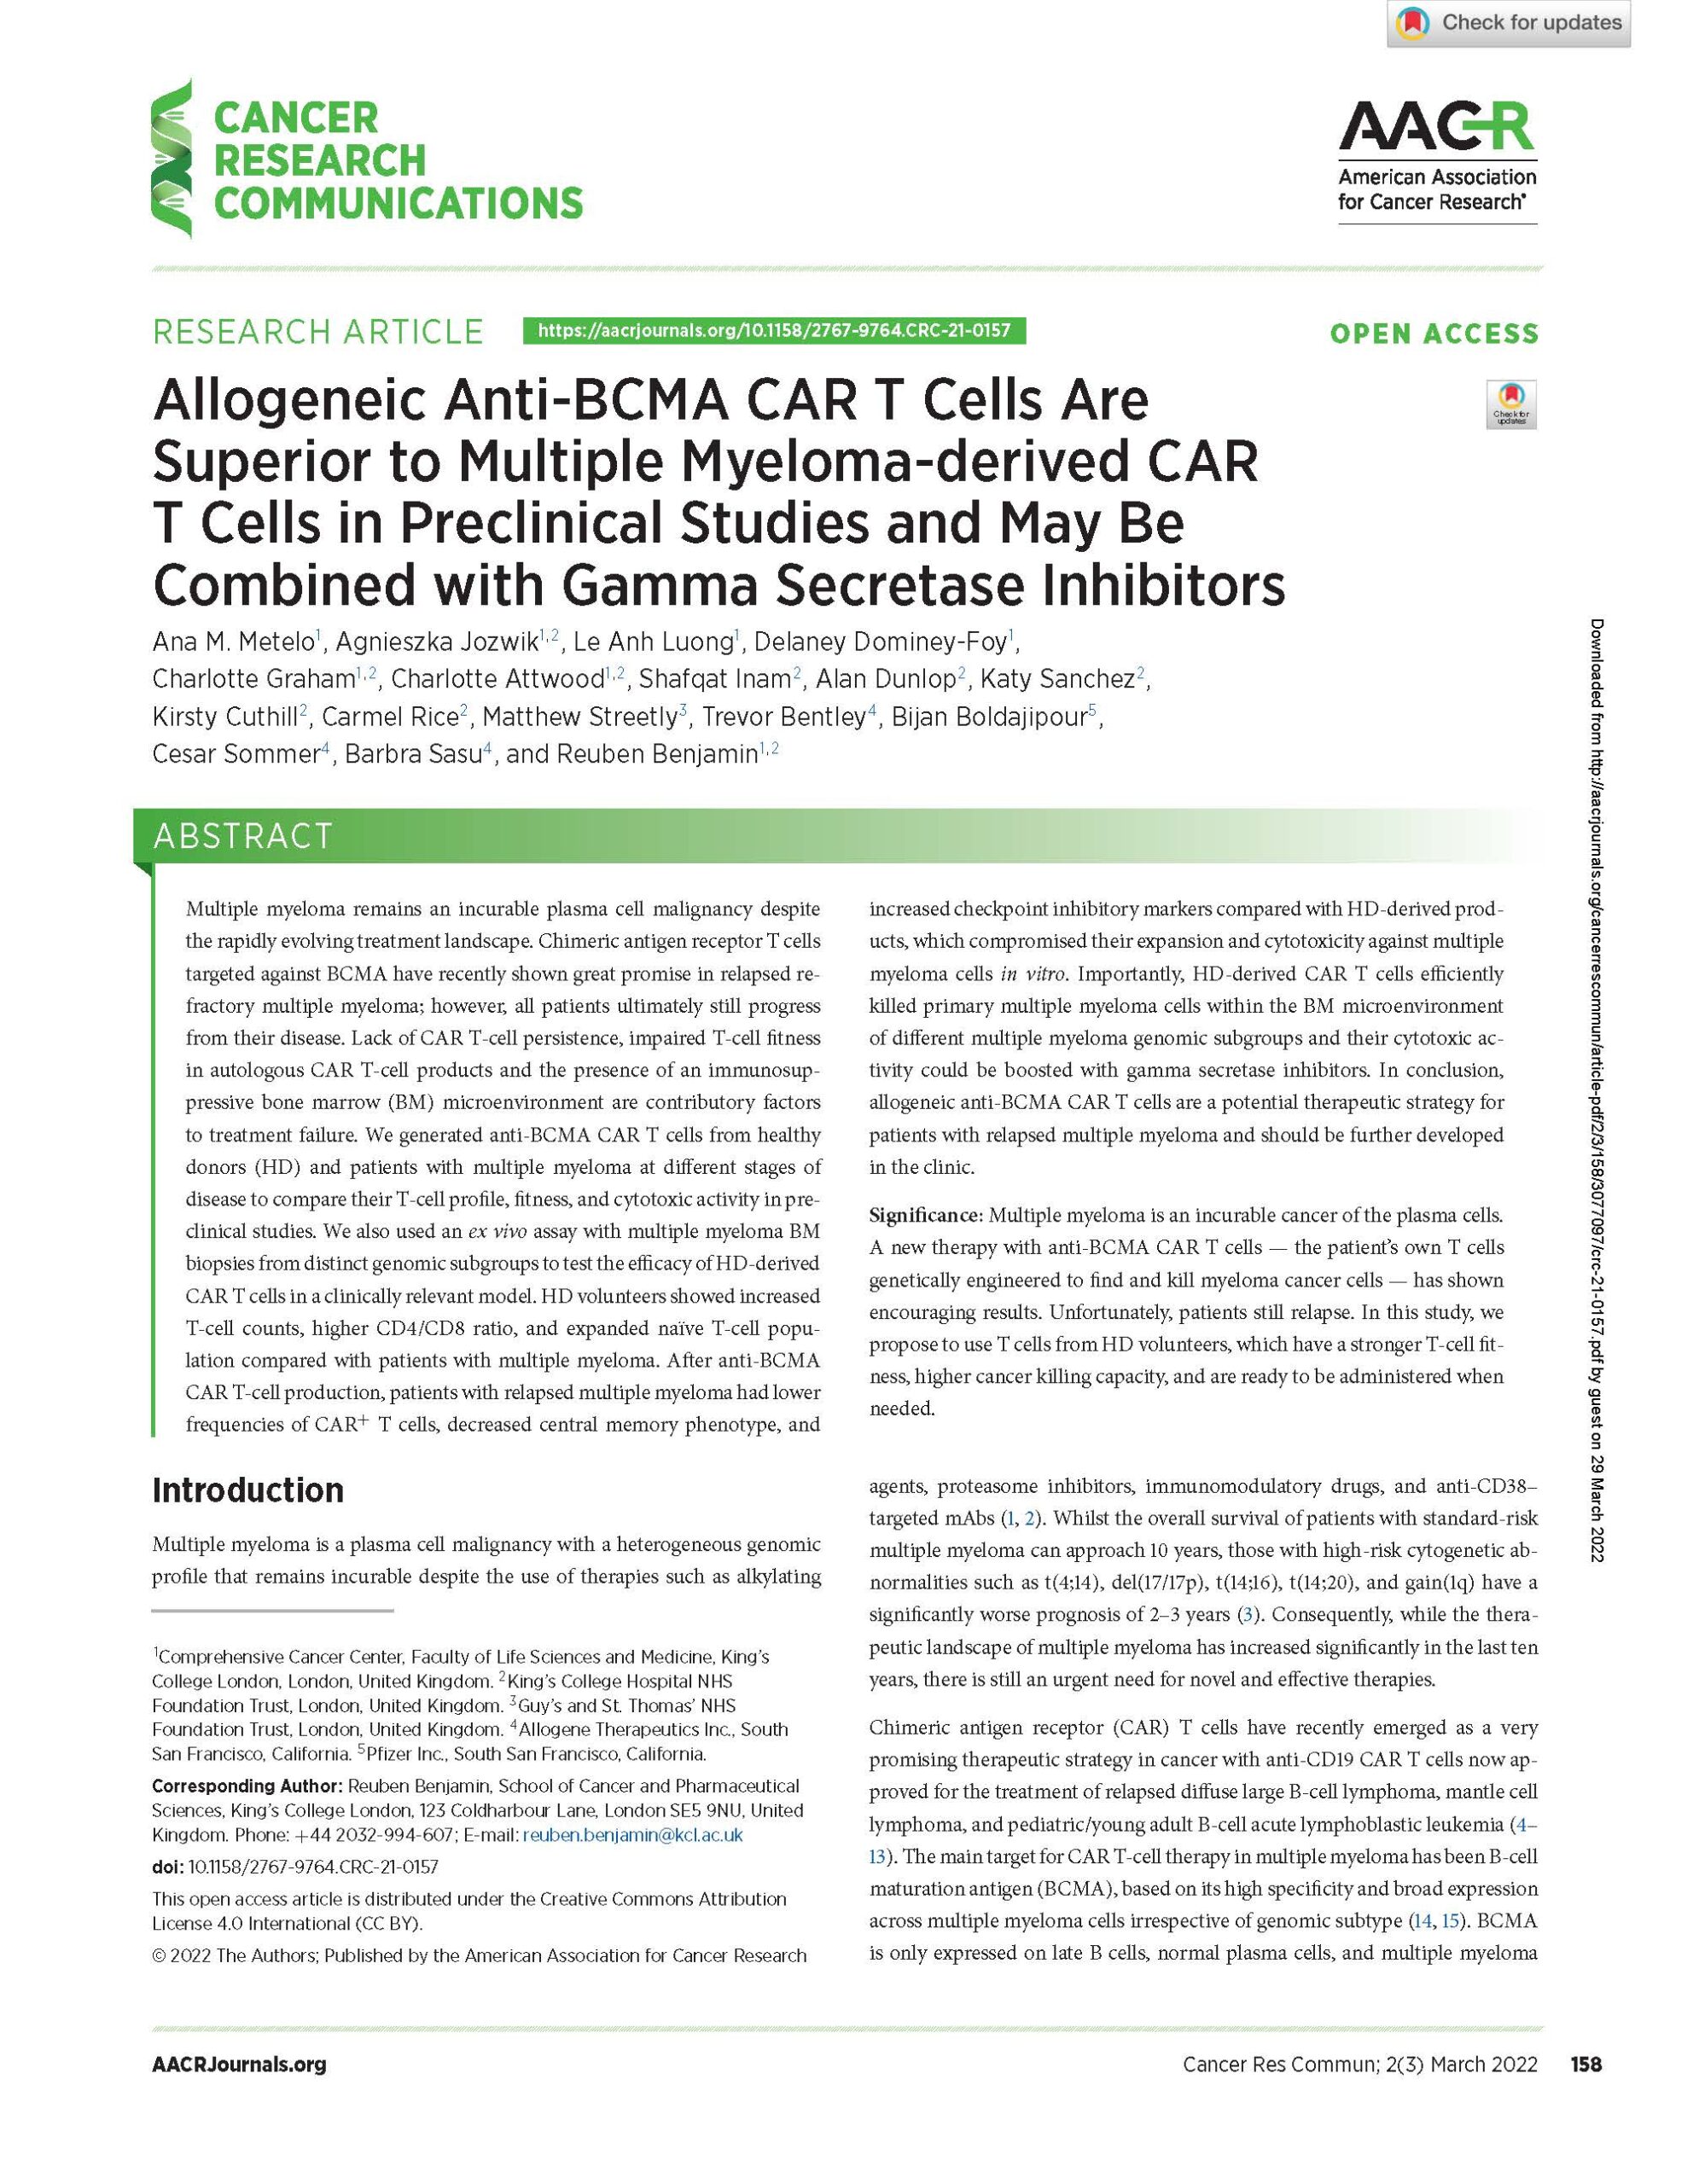 Allogene_Cancer Research_BCMA Publication_March 2022_Page_01